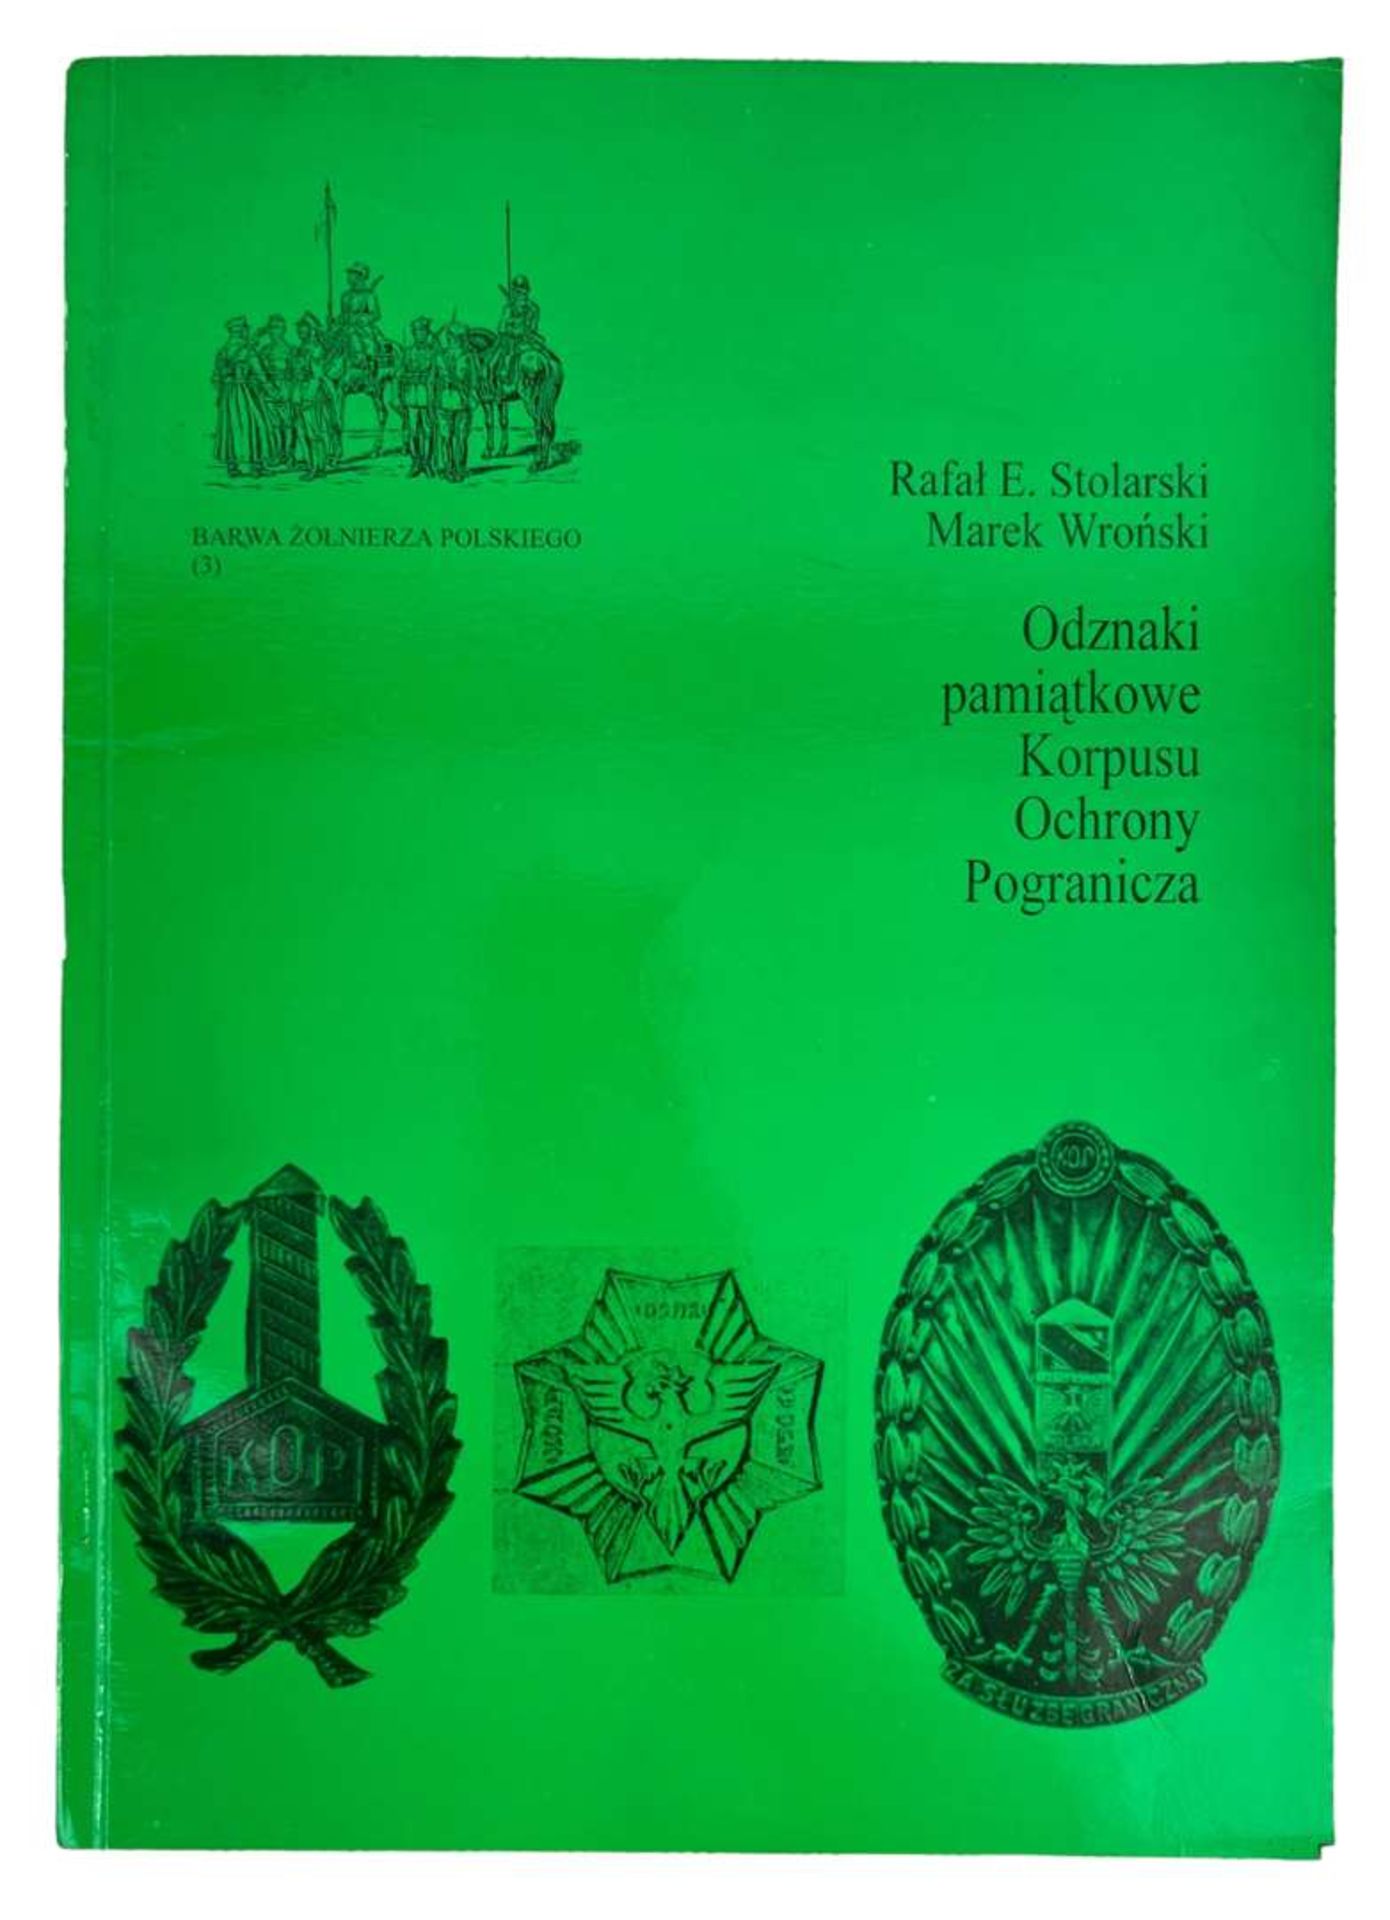 &nbsp;Polish Collectors Book “Badges of the Borderland Protection Corps”